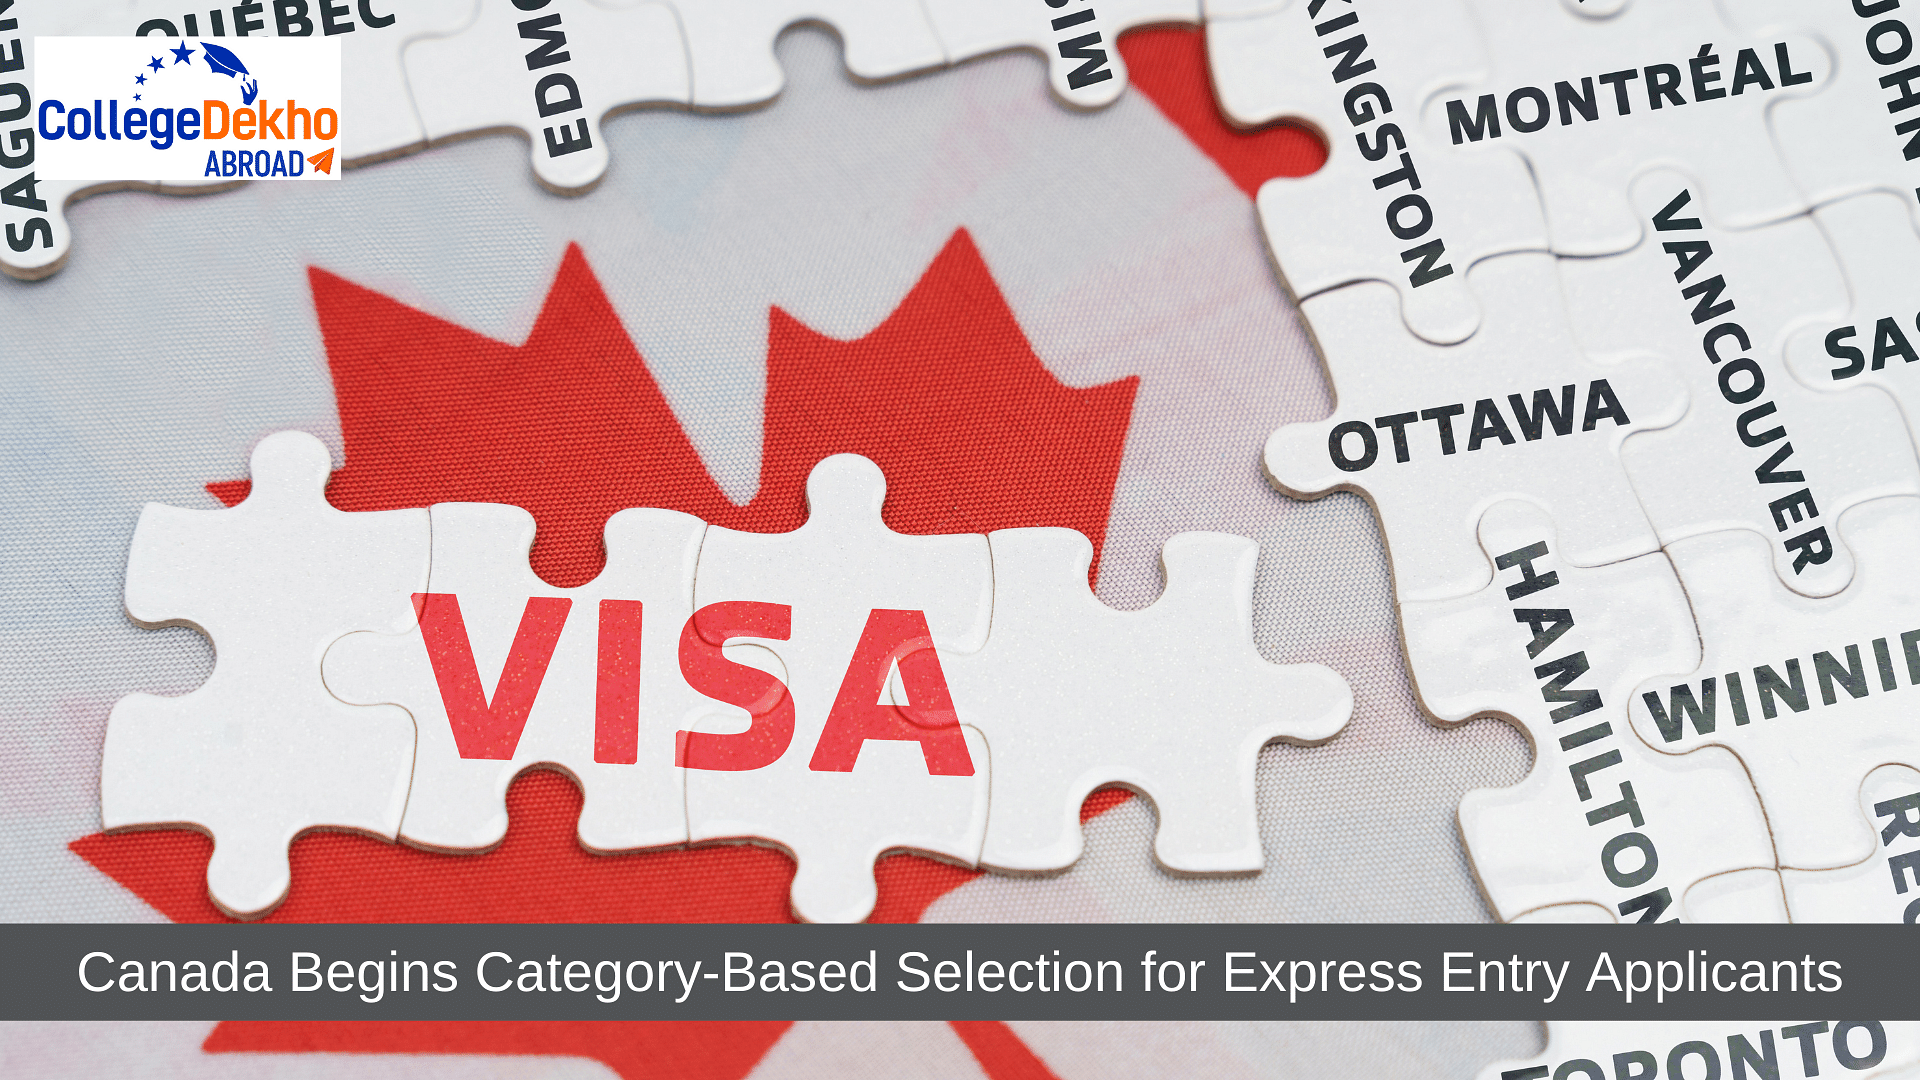 Canada Introduces Category-Based Selection for Express Entry Applicants